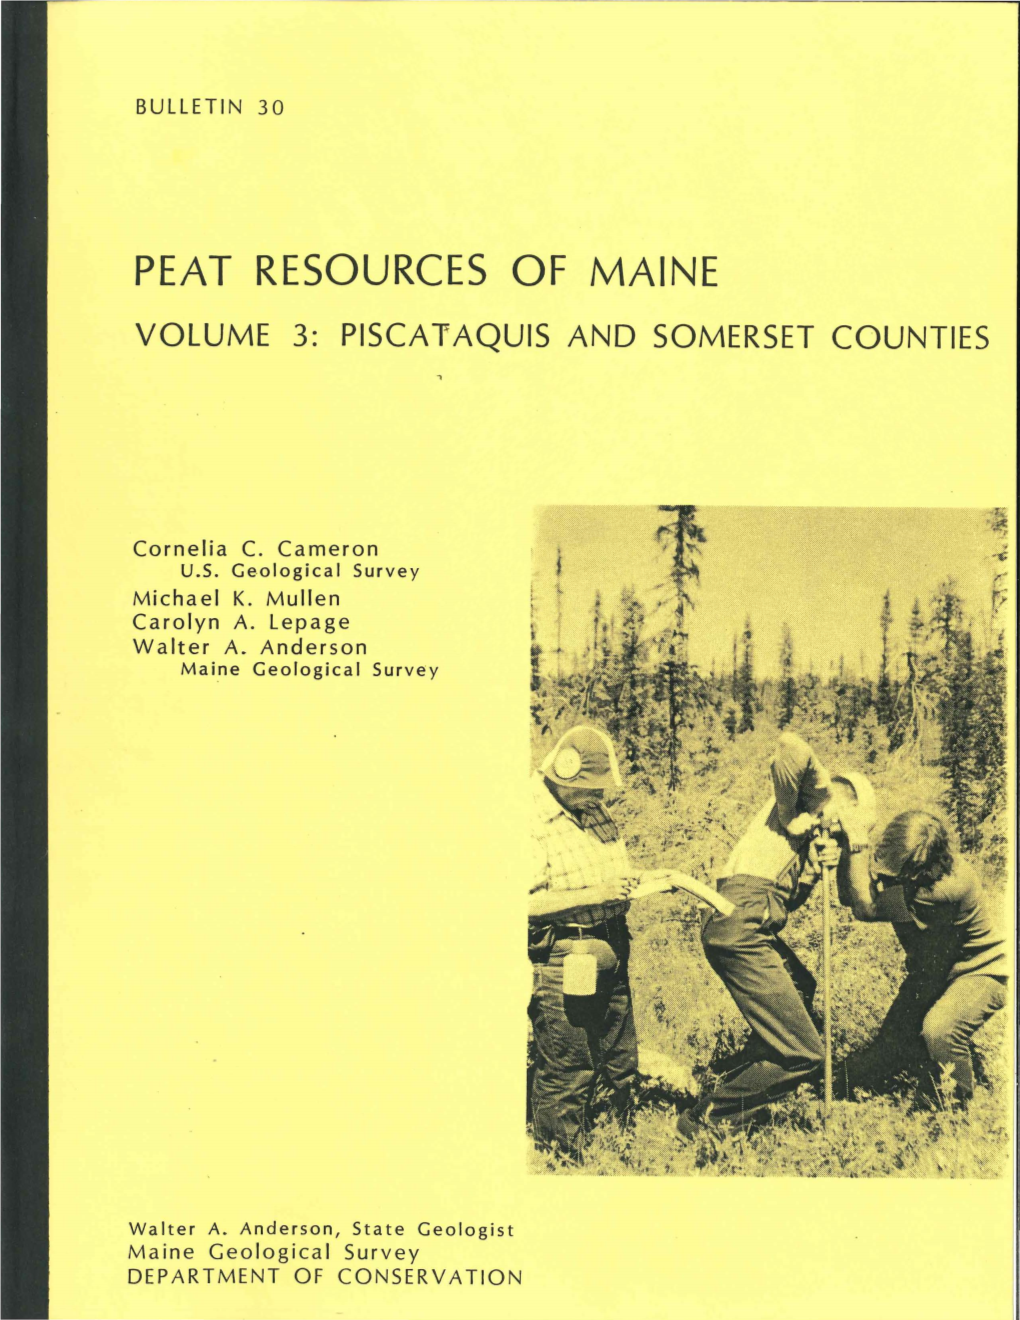 Peat Resources of Maine Volume 3: Pisca I Aquis and Somerset Counties